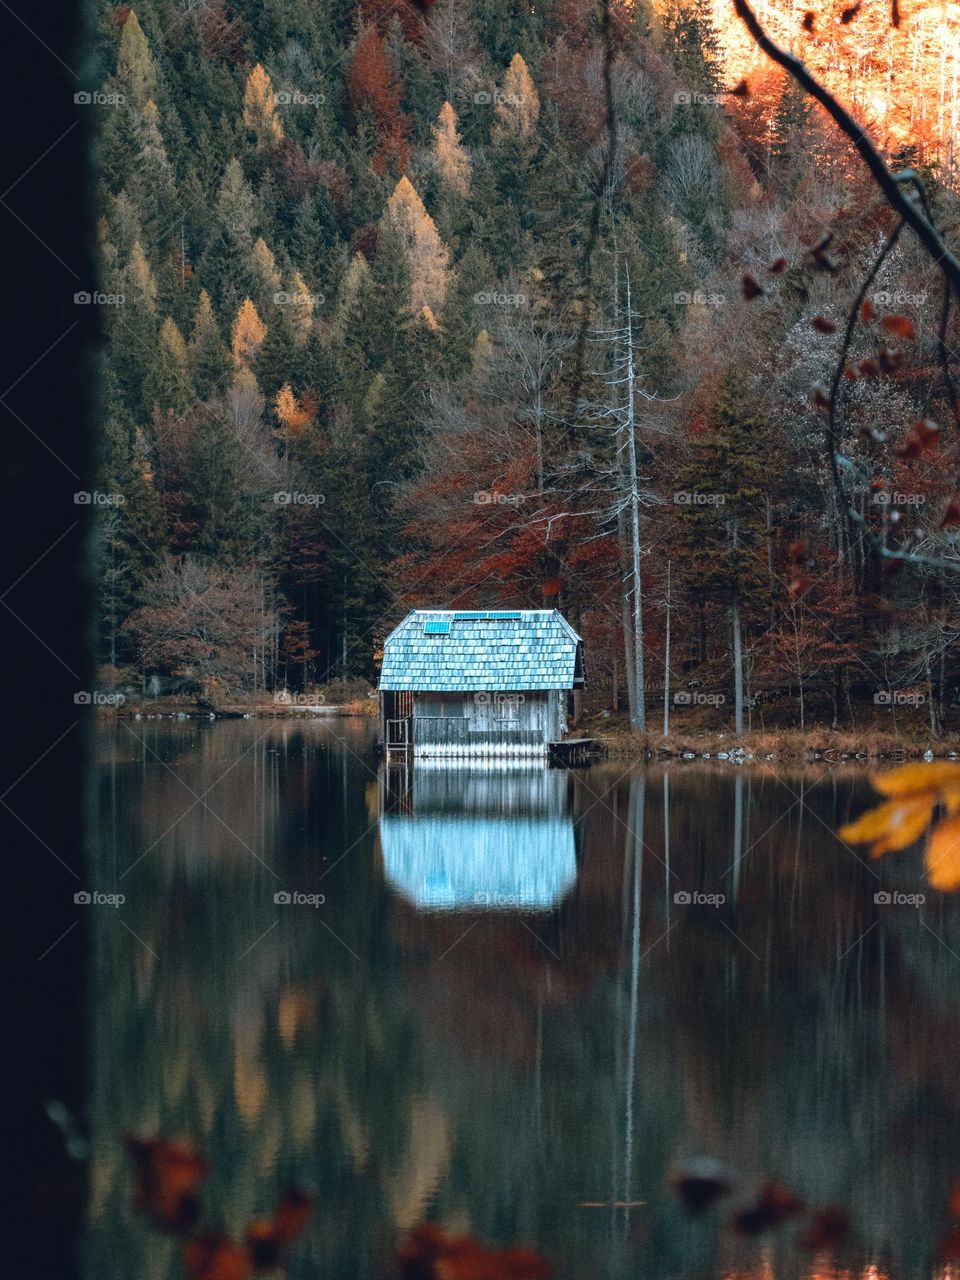 A wooden hut on the lake